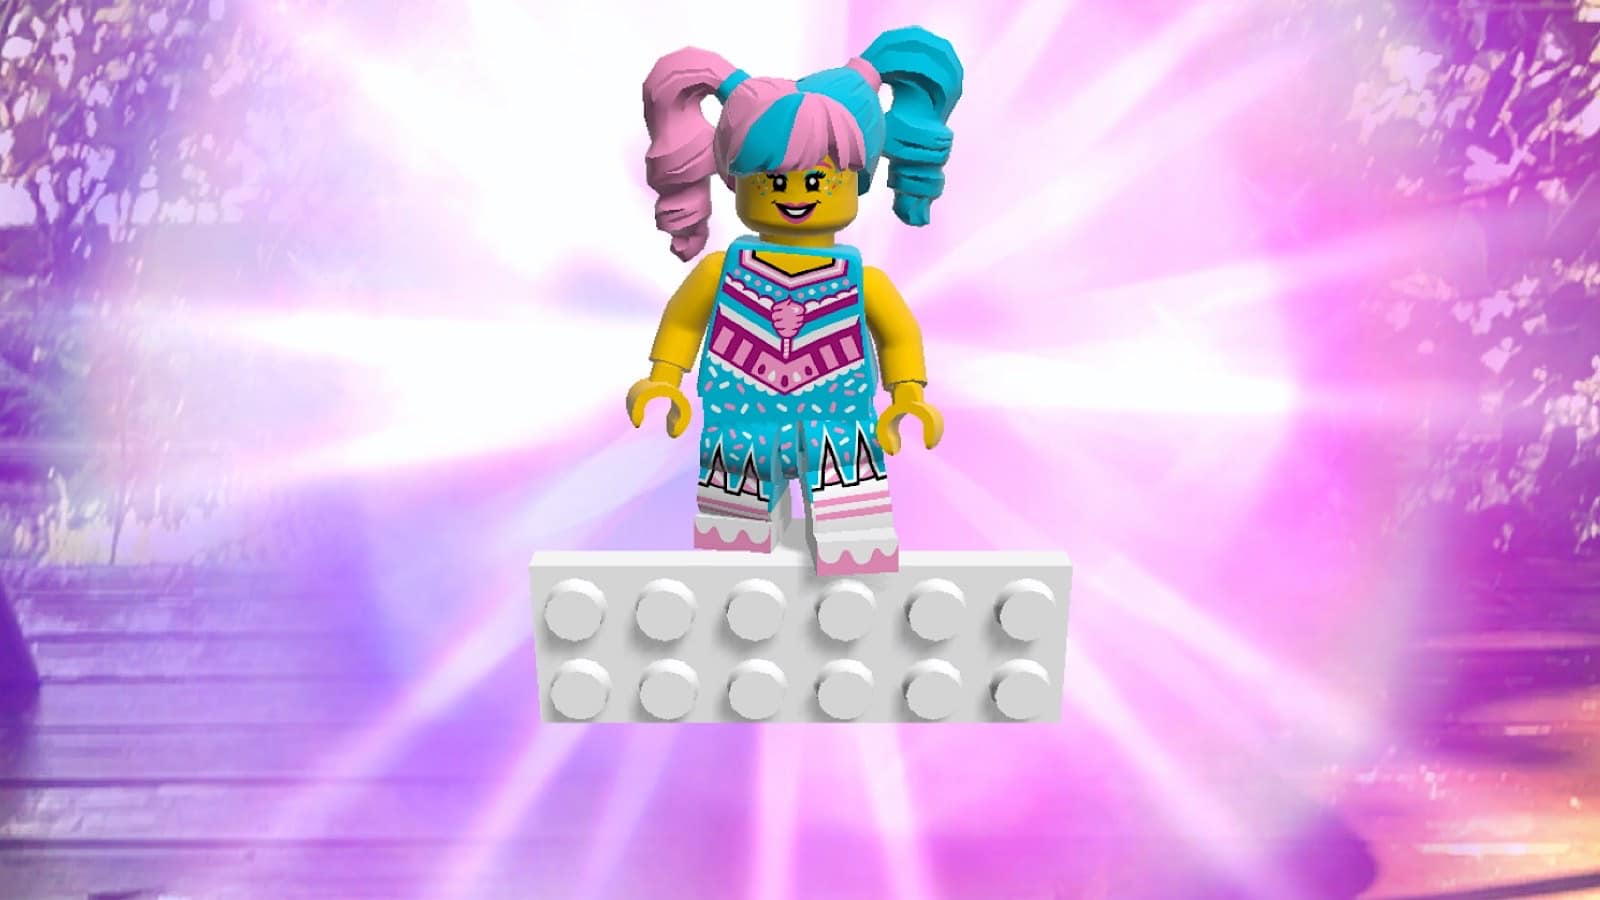 Lego Vidiyo's music video maker shows the characters in real life